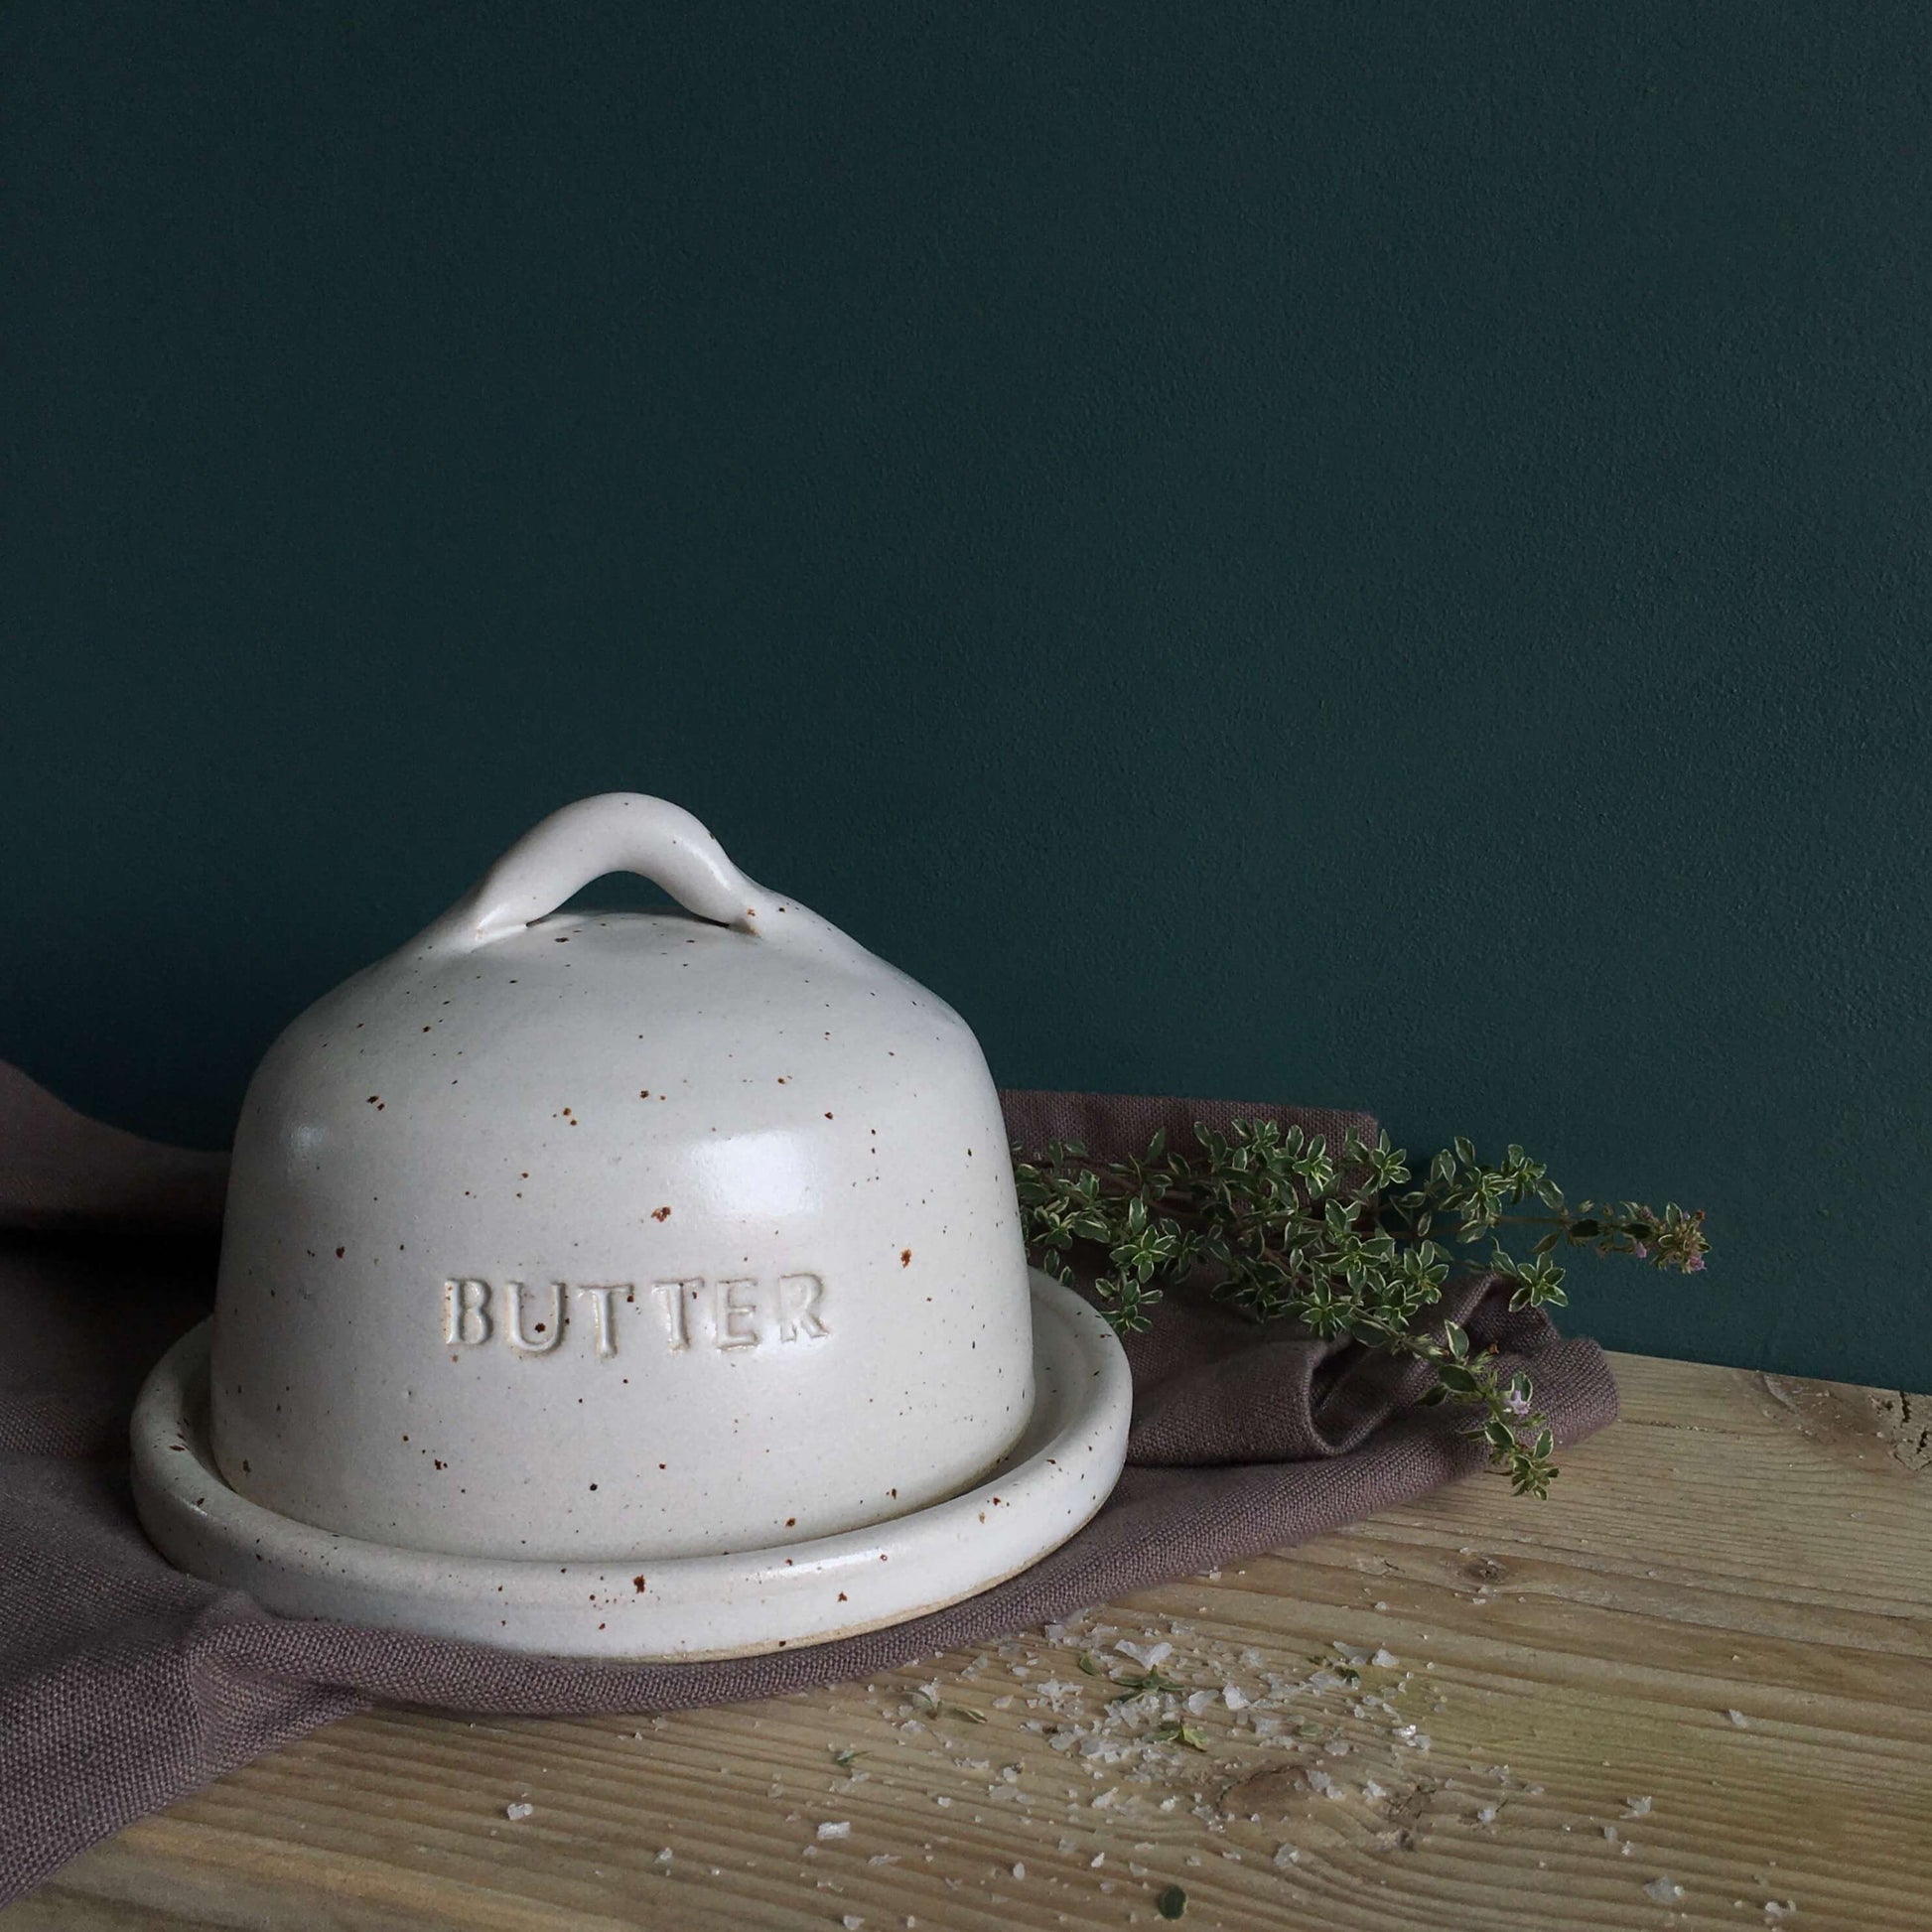 The Village Pottery Ceramic Butter Dish